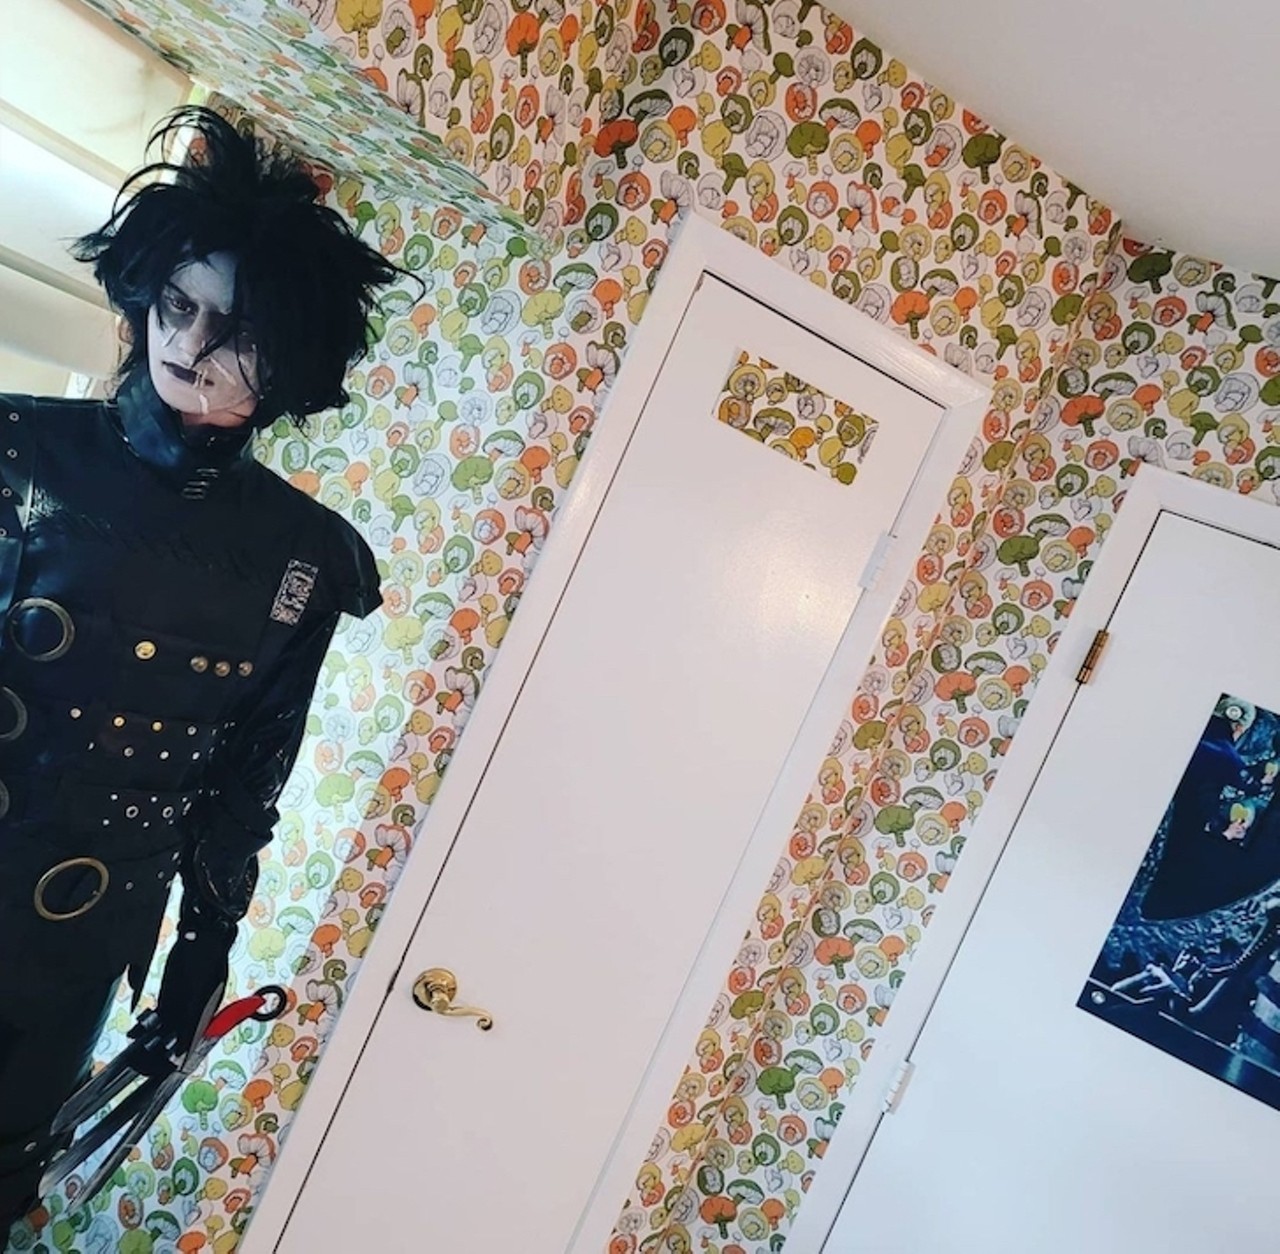 PHOTOS: The 'Edward Scissorhands' House in Lutz is now a free museum